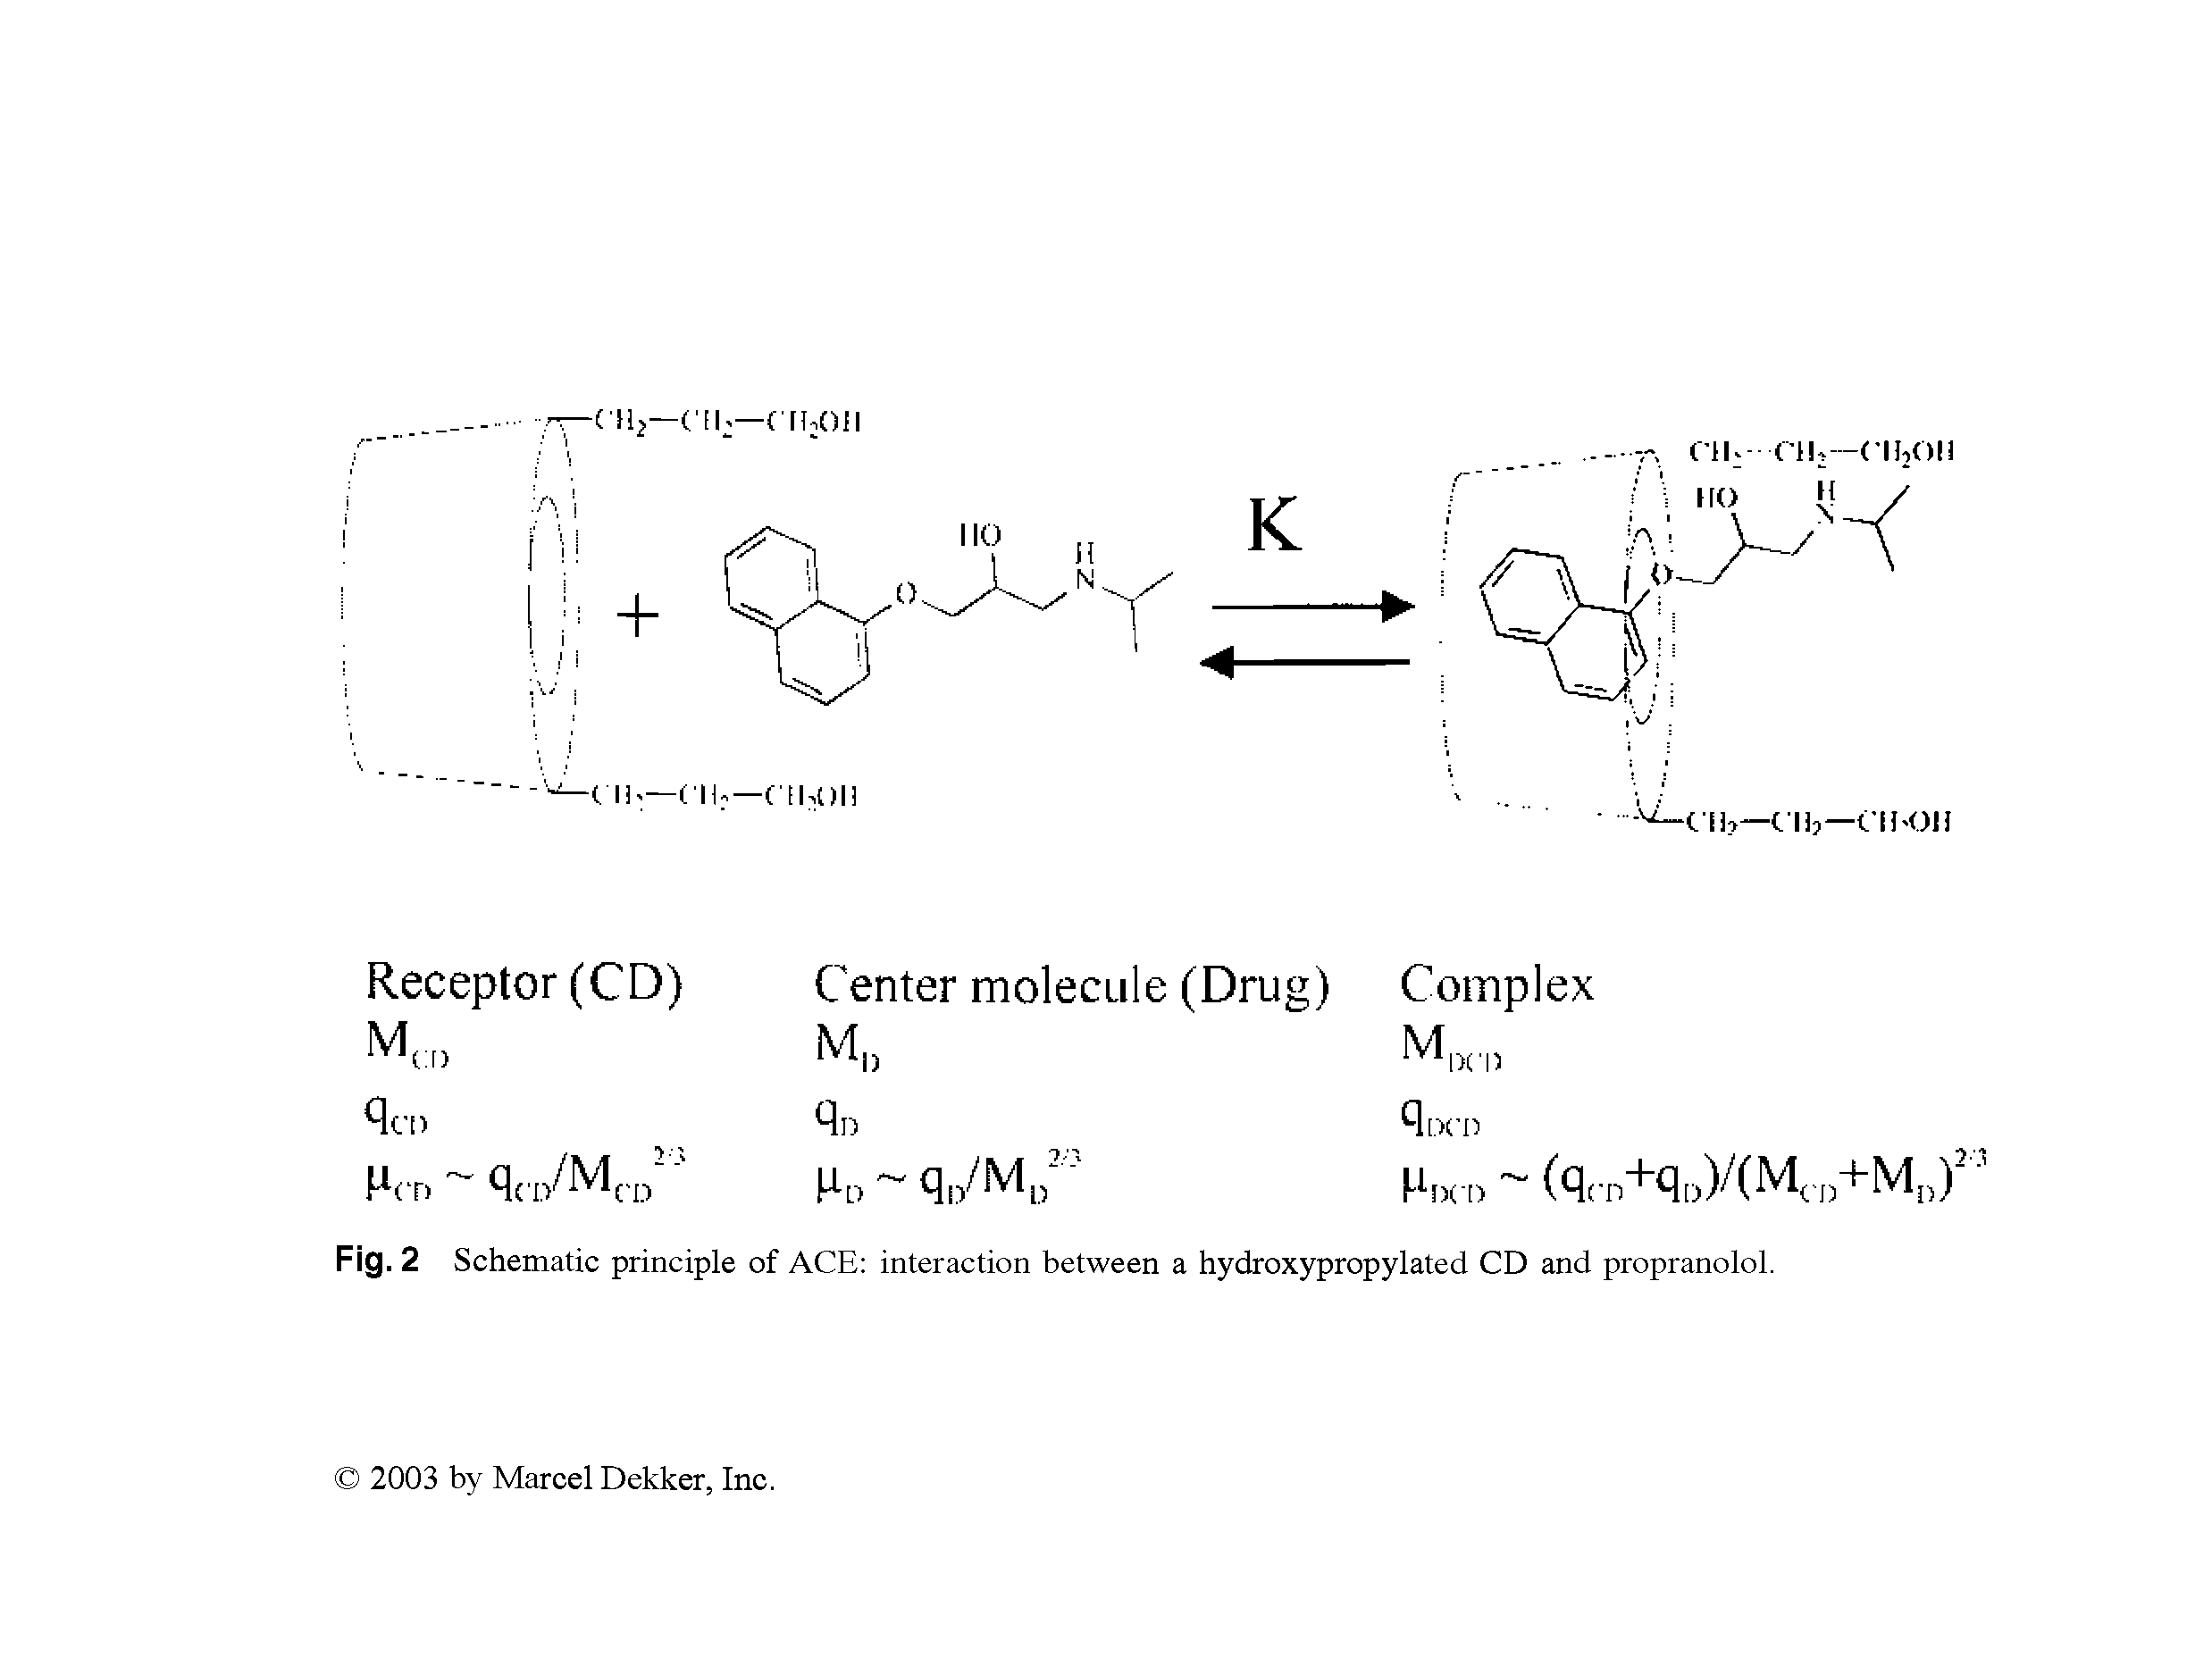 Schematic principle of ACE interaction between a hydroxypropylated CD and propranolol.